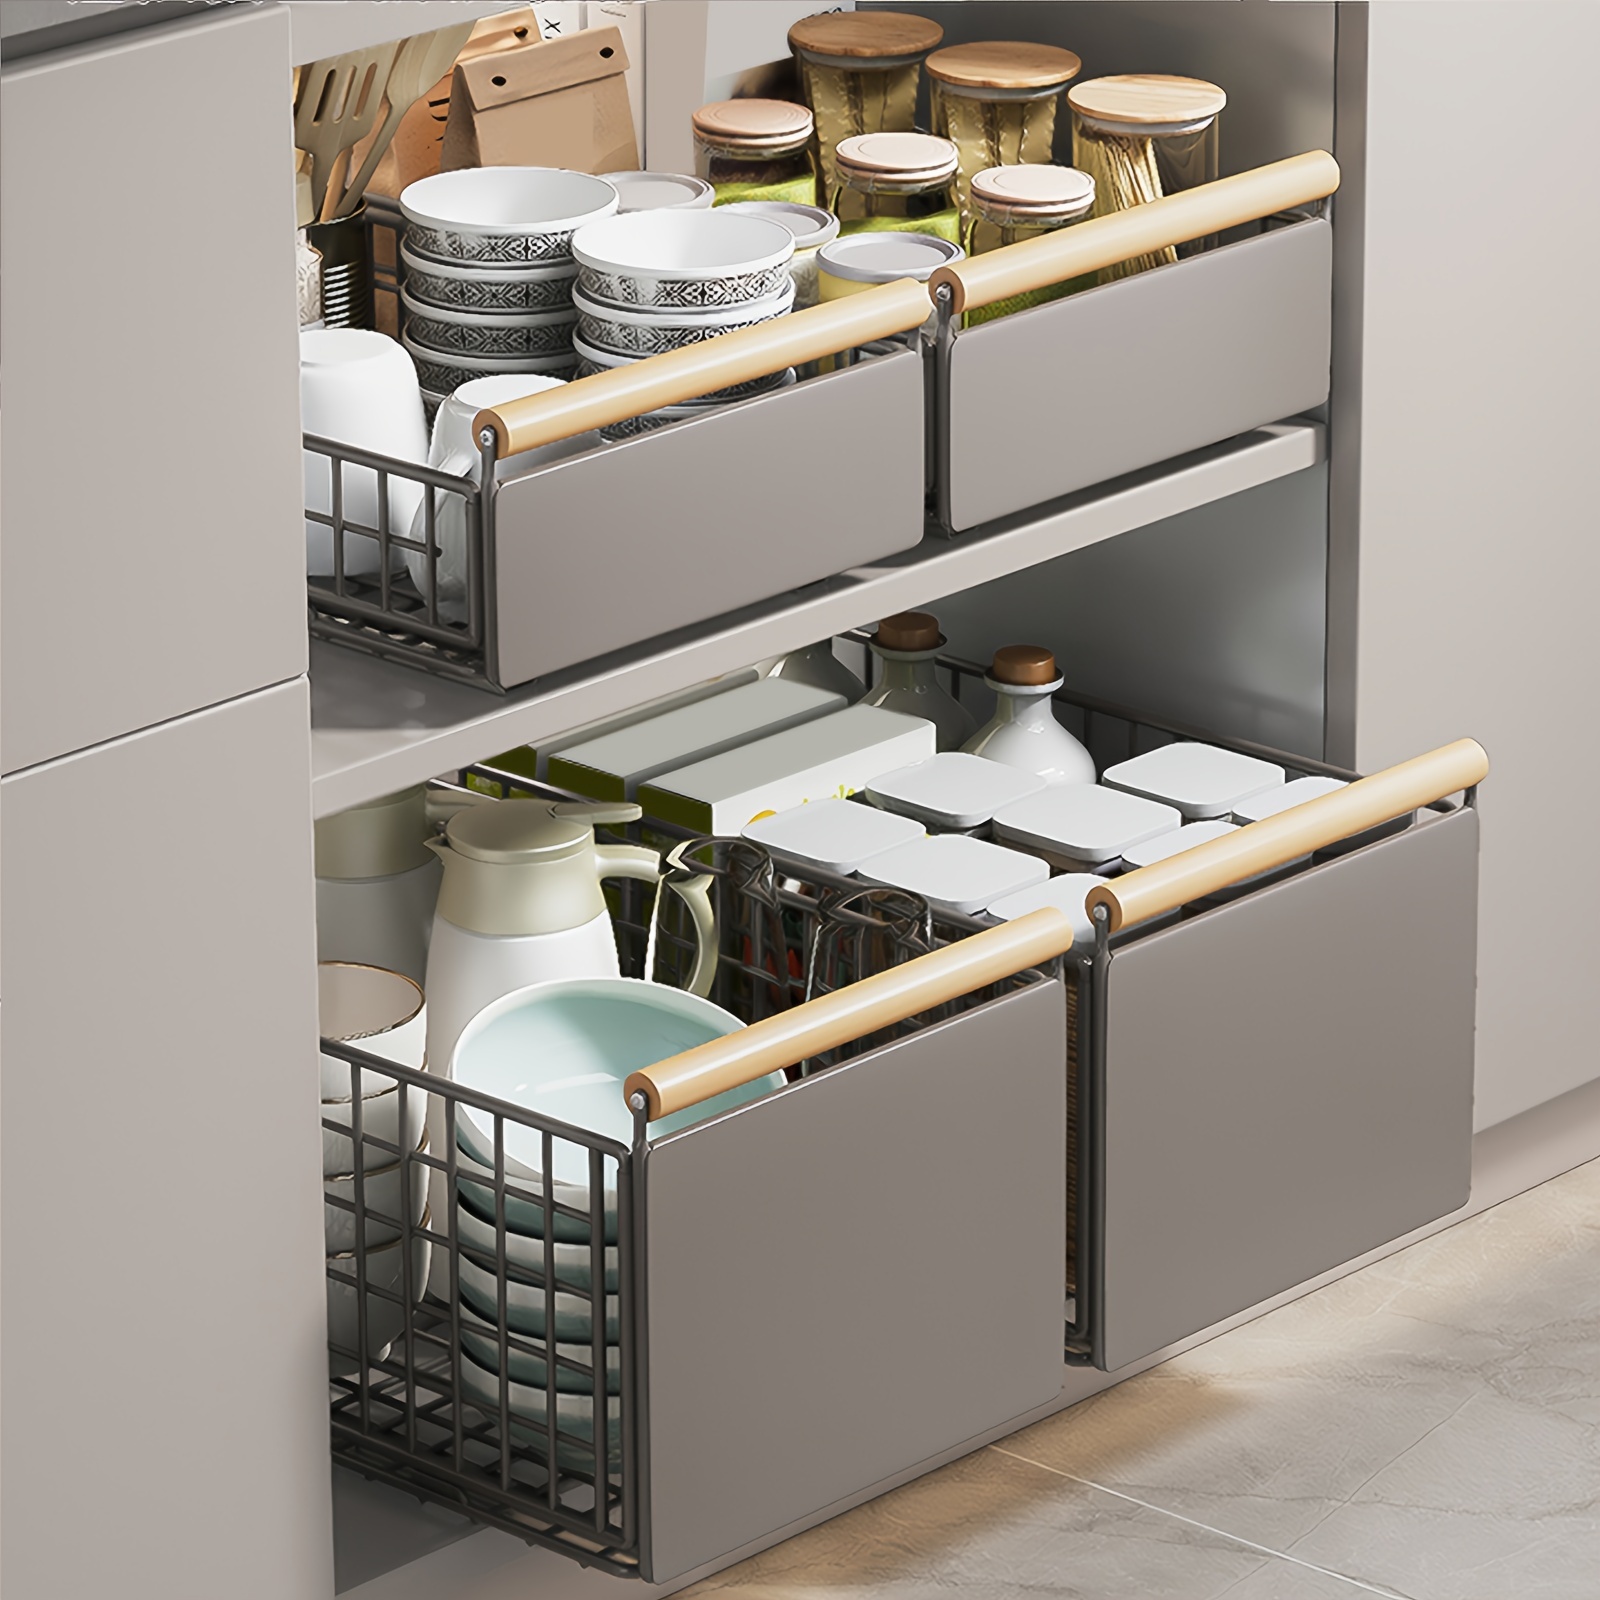 

1pc Contemporary Metal Slide-out Cabinet Drawer Organizer, Under Sink Storage Basket For Kitchen Supplies, Condiments, Dishes, Cutlery & Snacks - Versatile Pull-out Storage Rack